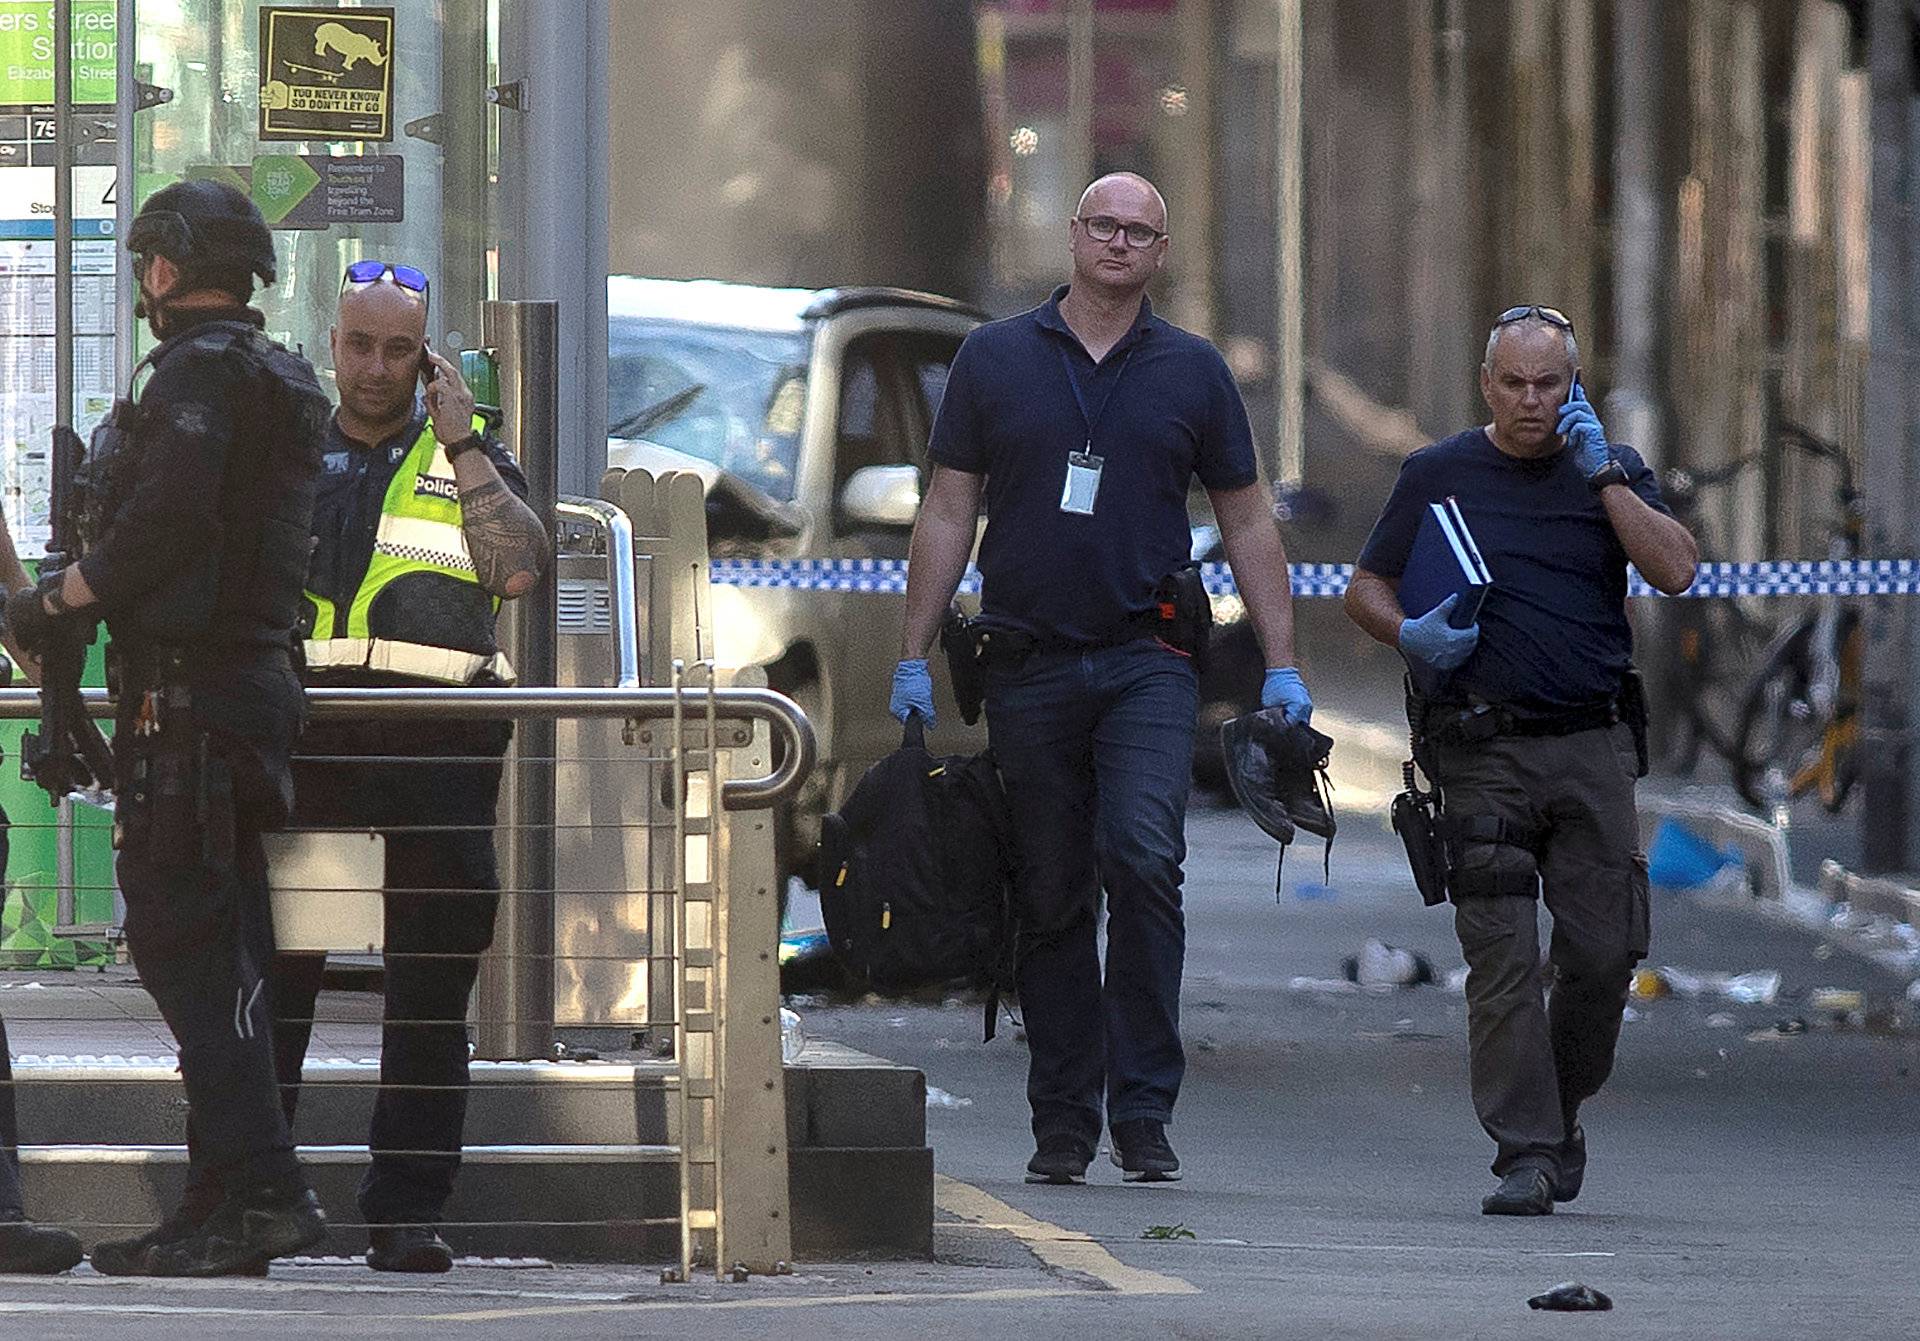 Australian police is seen near the place where they arrested the driver of a vehicle that had ploughed into pedestrians at a crowded intersection near the Flinders Street train station, in central Melbourne